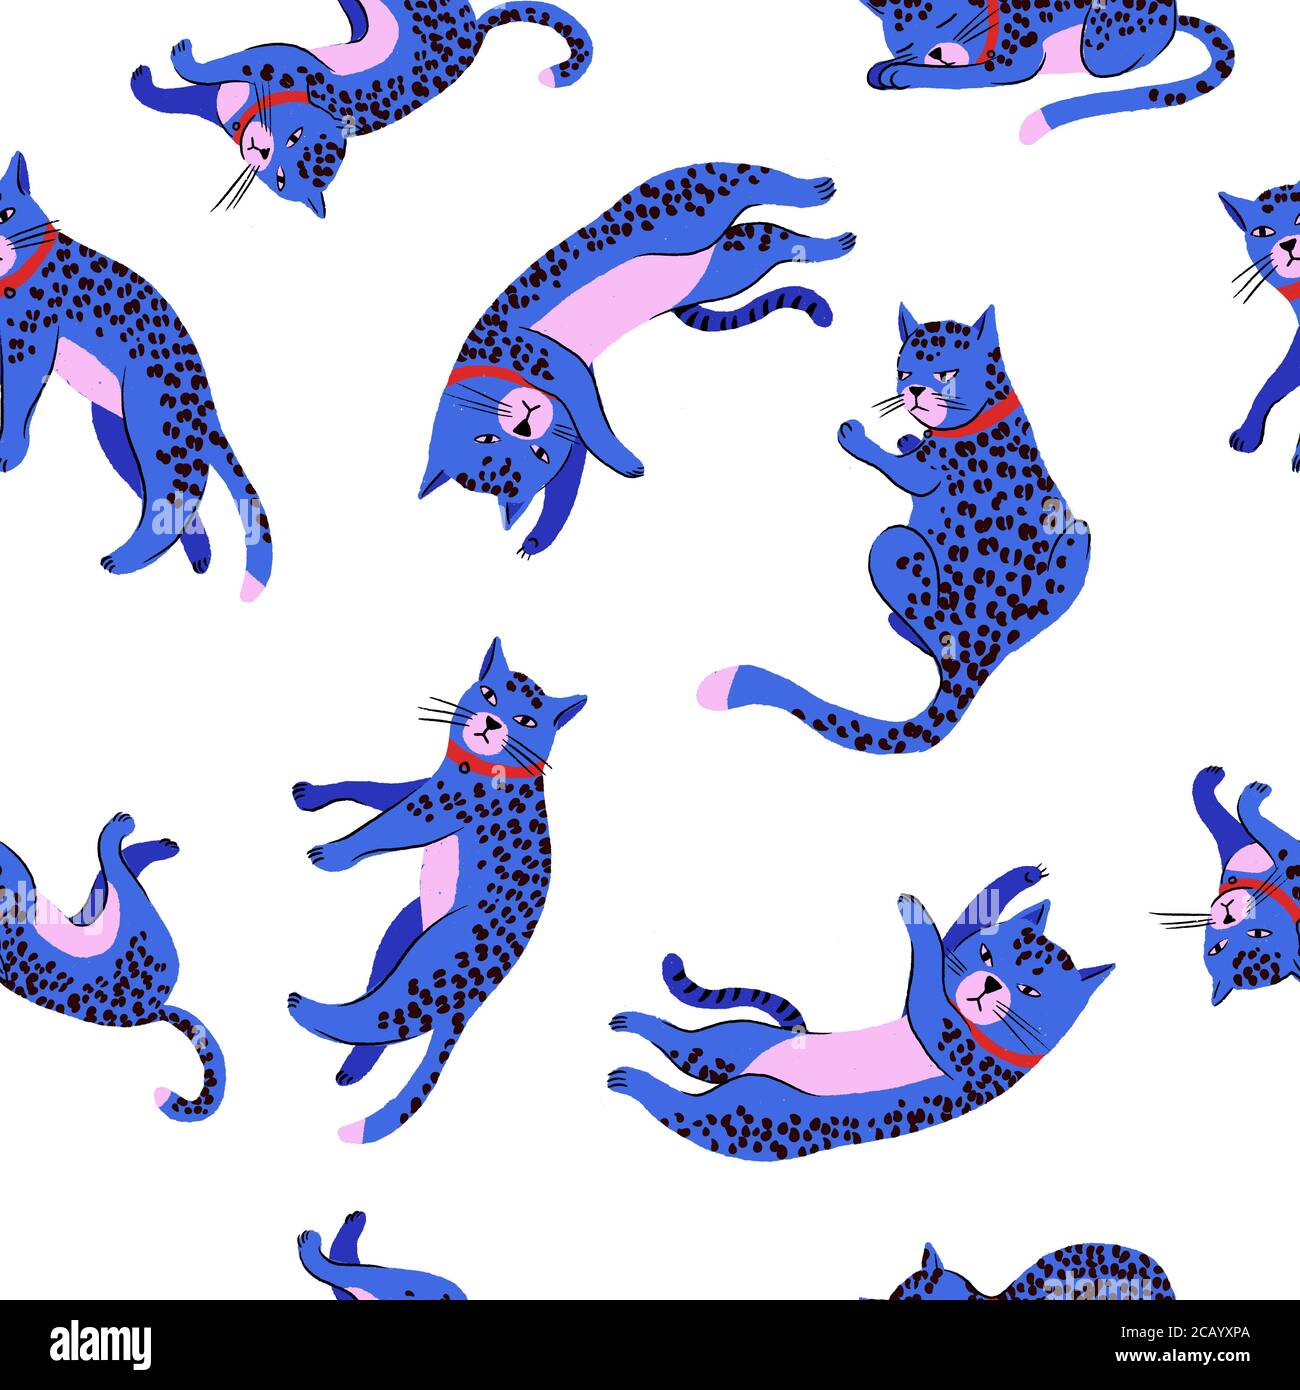 Seamless pattern with blue cats or leopards. Vector. Stock Vector